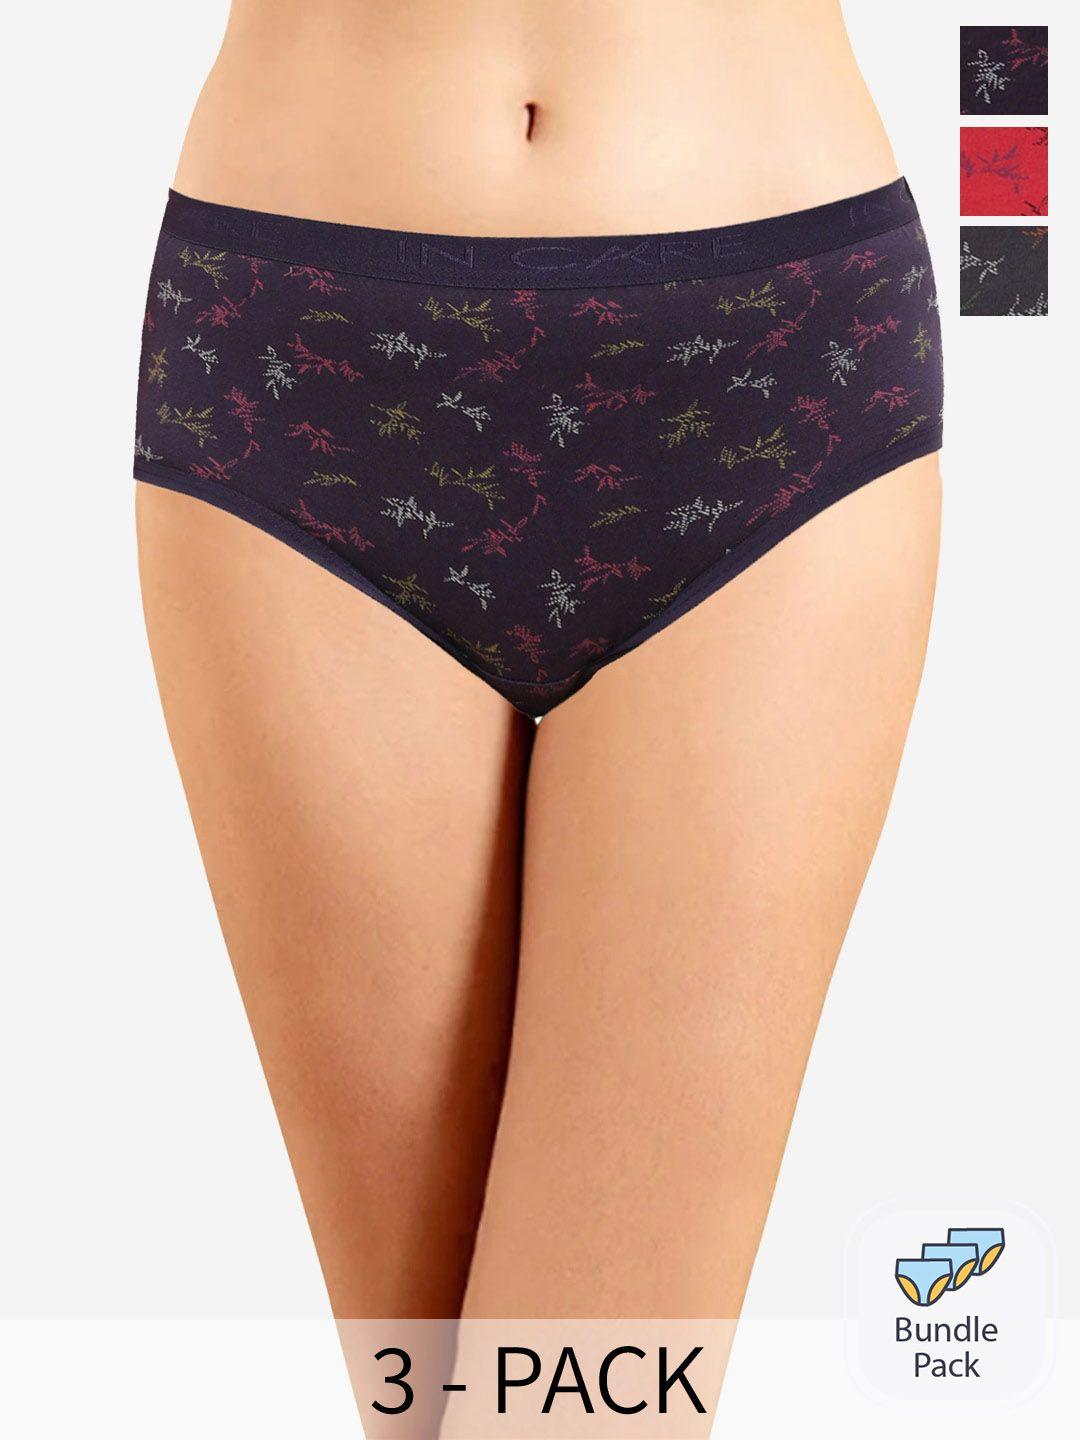 in-care-pack-of-3-floral-printed-mid-rise-cotton-hipster-brief-icoe-073_m